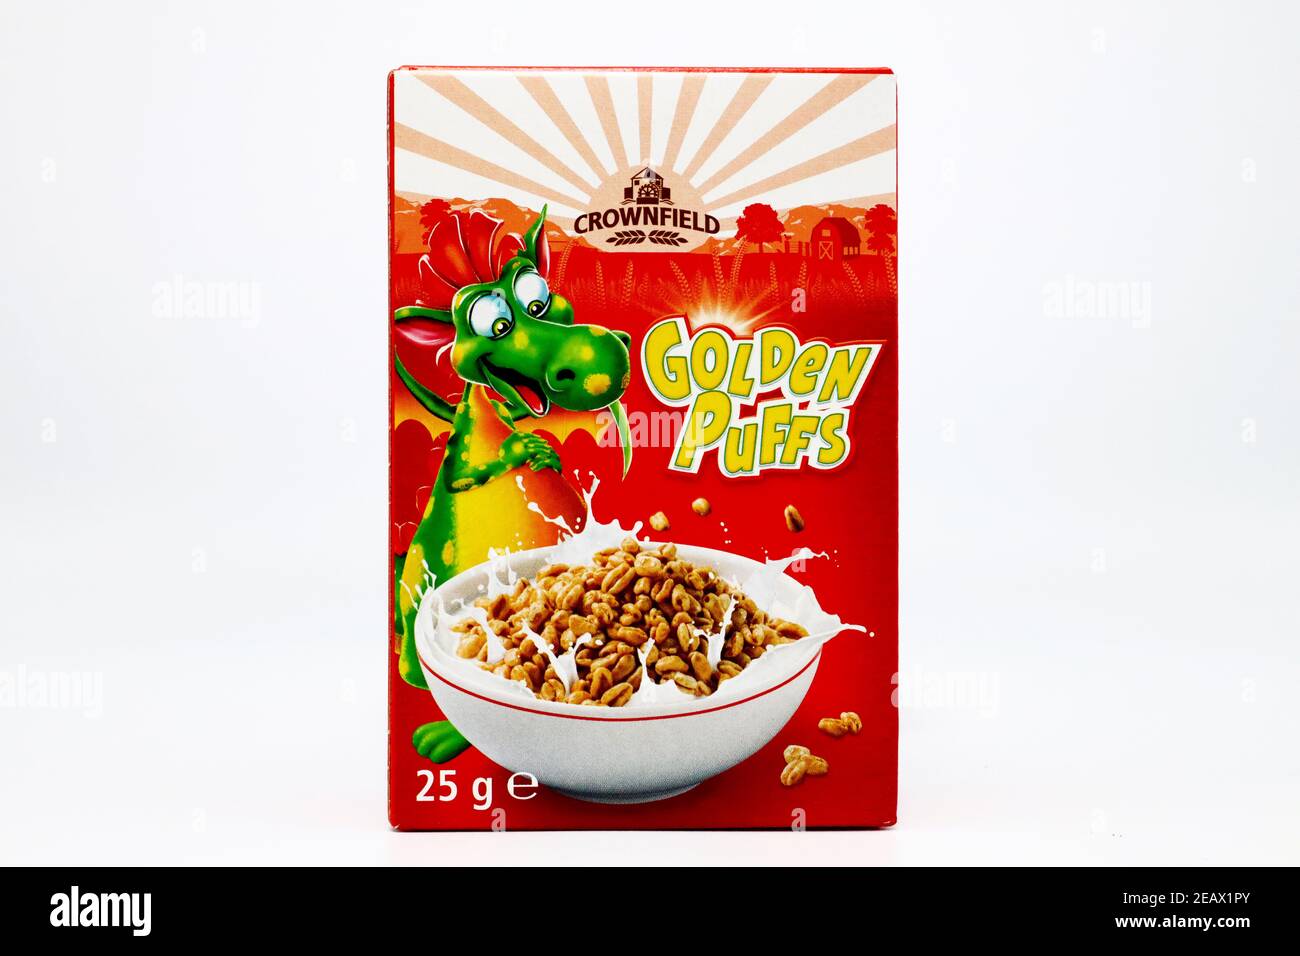 CROWNFIELD Cereals sold by LIDL Supermarket chain Stock Photo